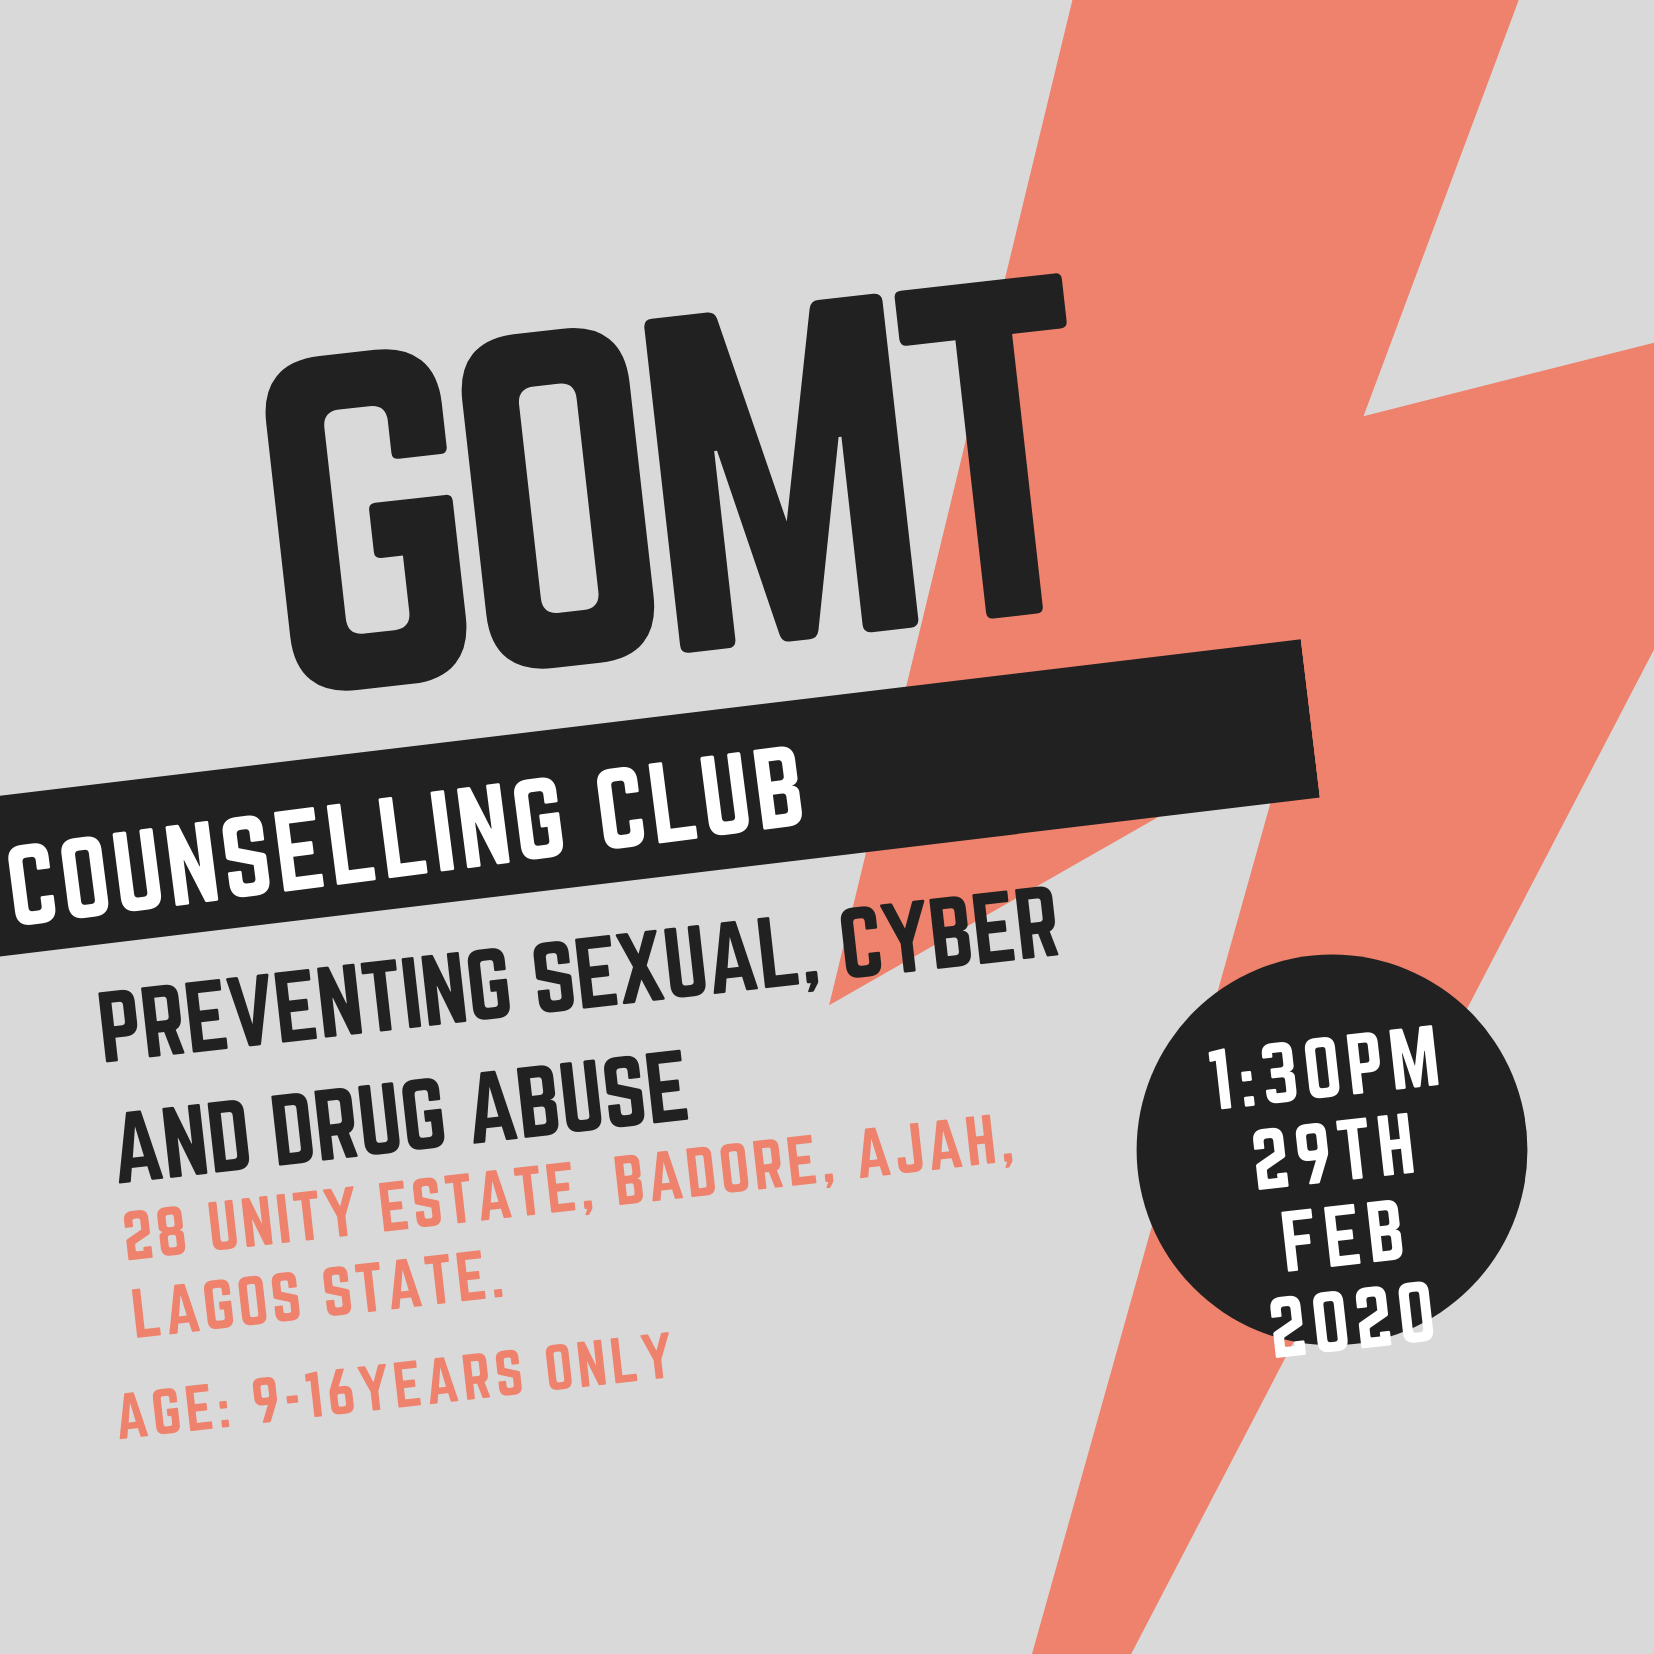 GOMT counselling club